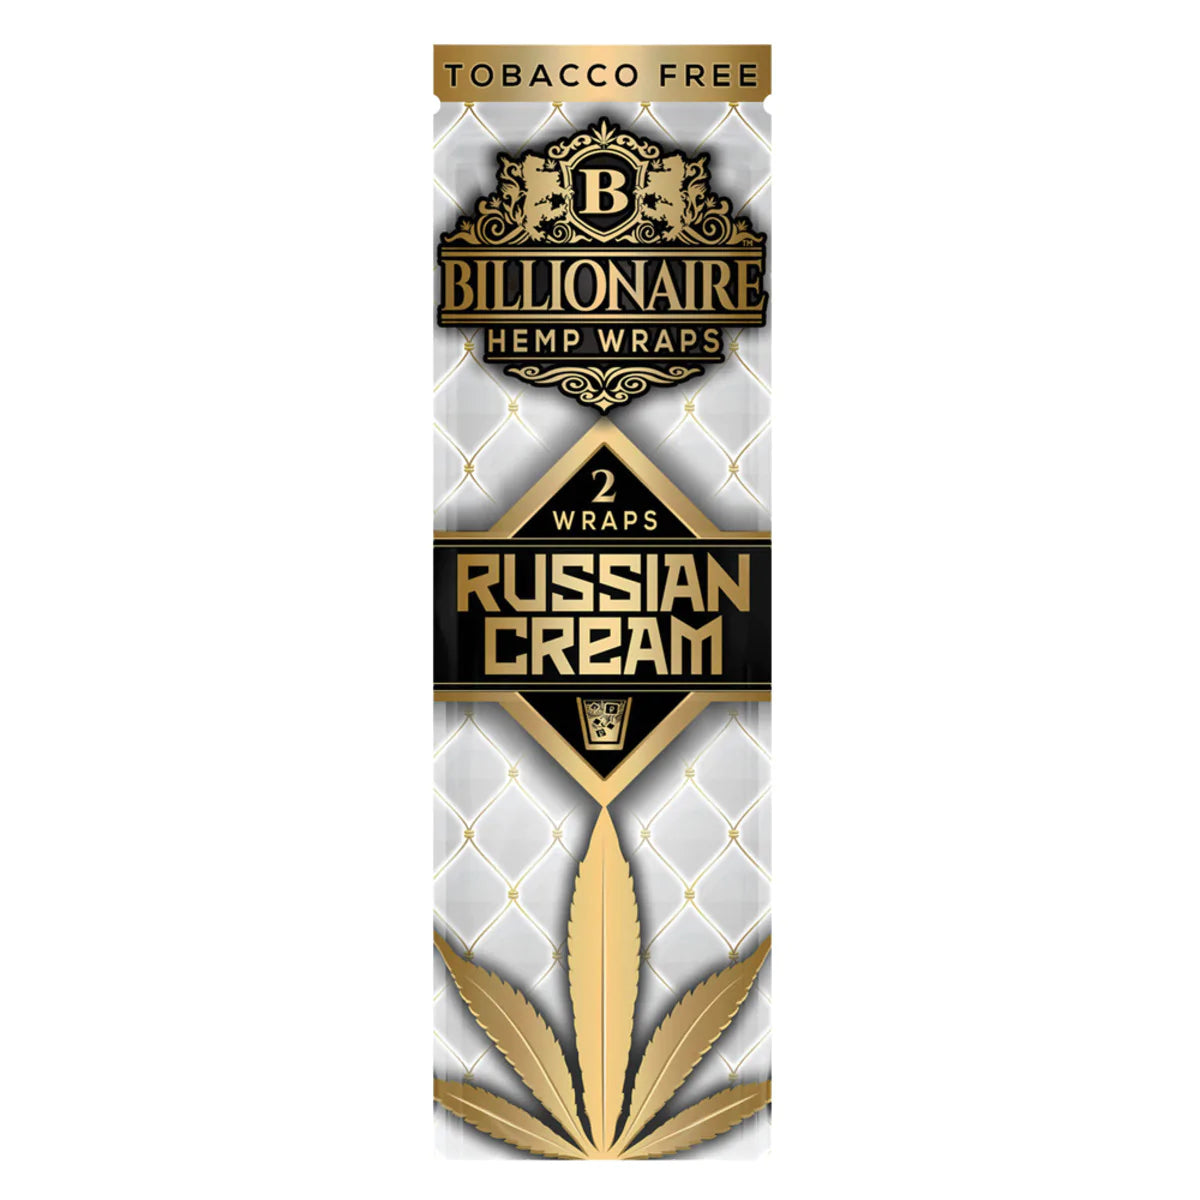 Billionaire Hemp Wraps Russian Cream 25 Pack, Tobacco-Free Blunt Wraps for Dry Herbs